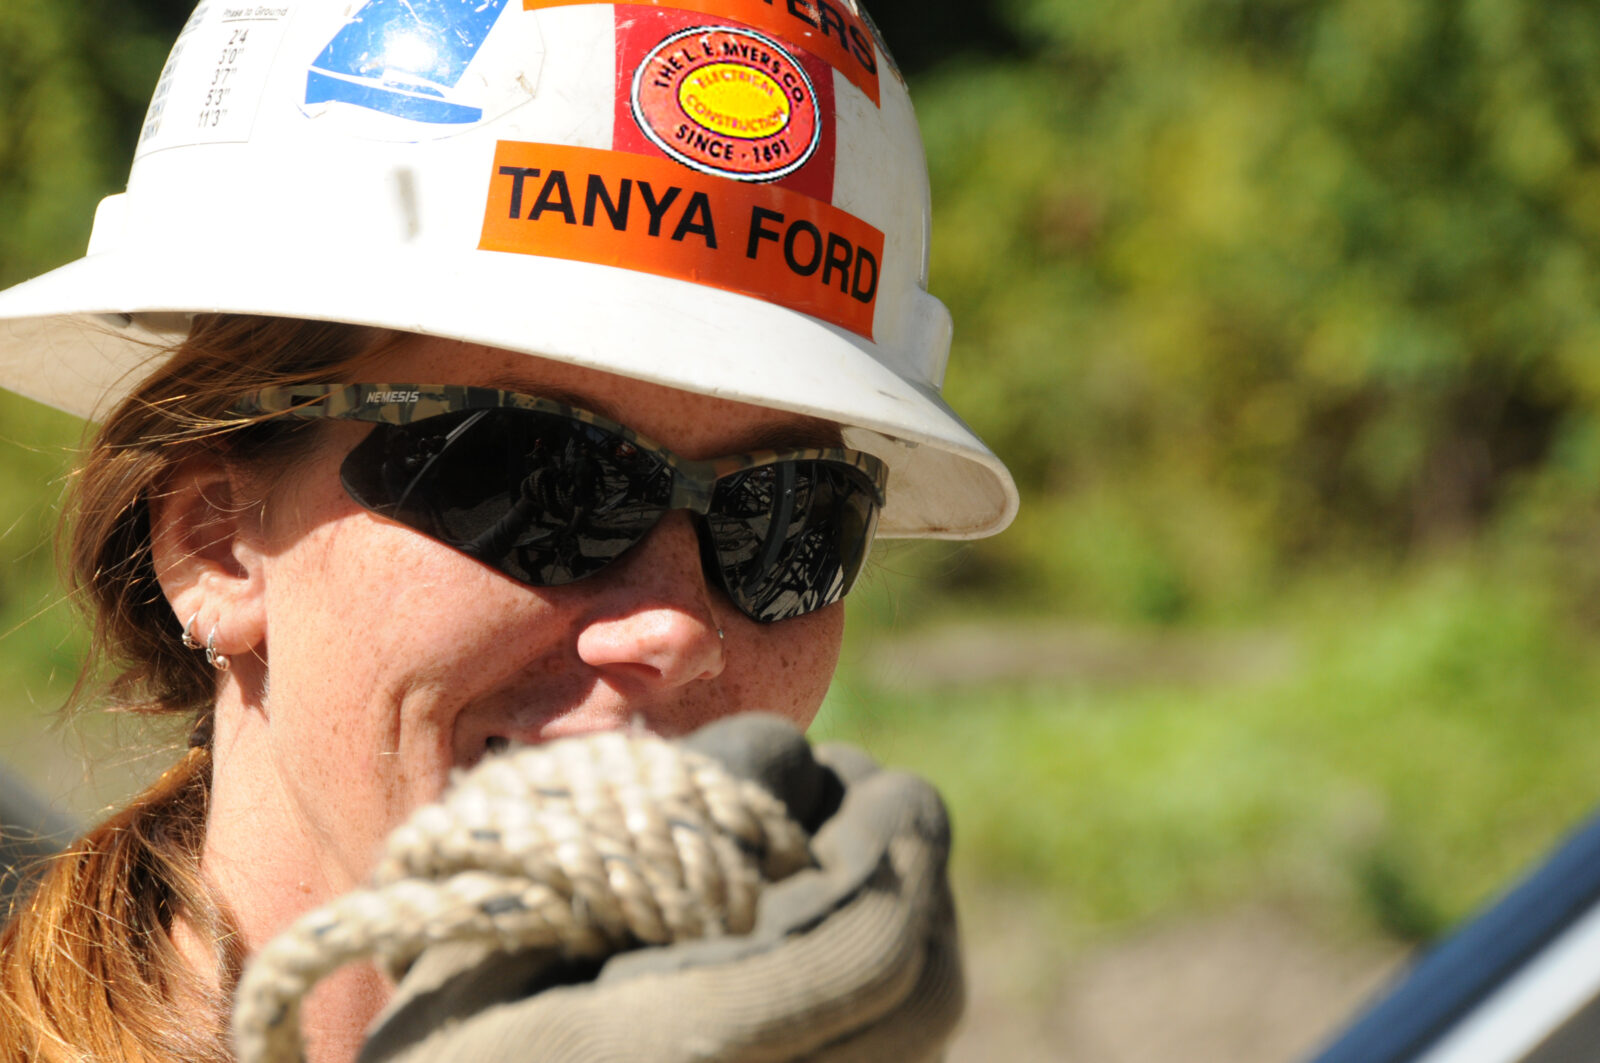 Tanya Ford working at construction site